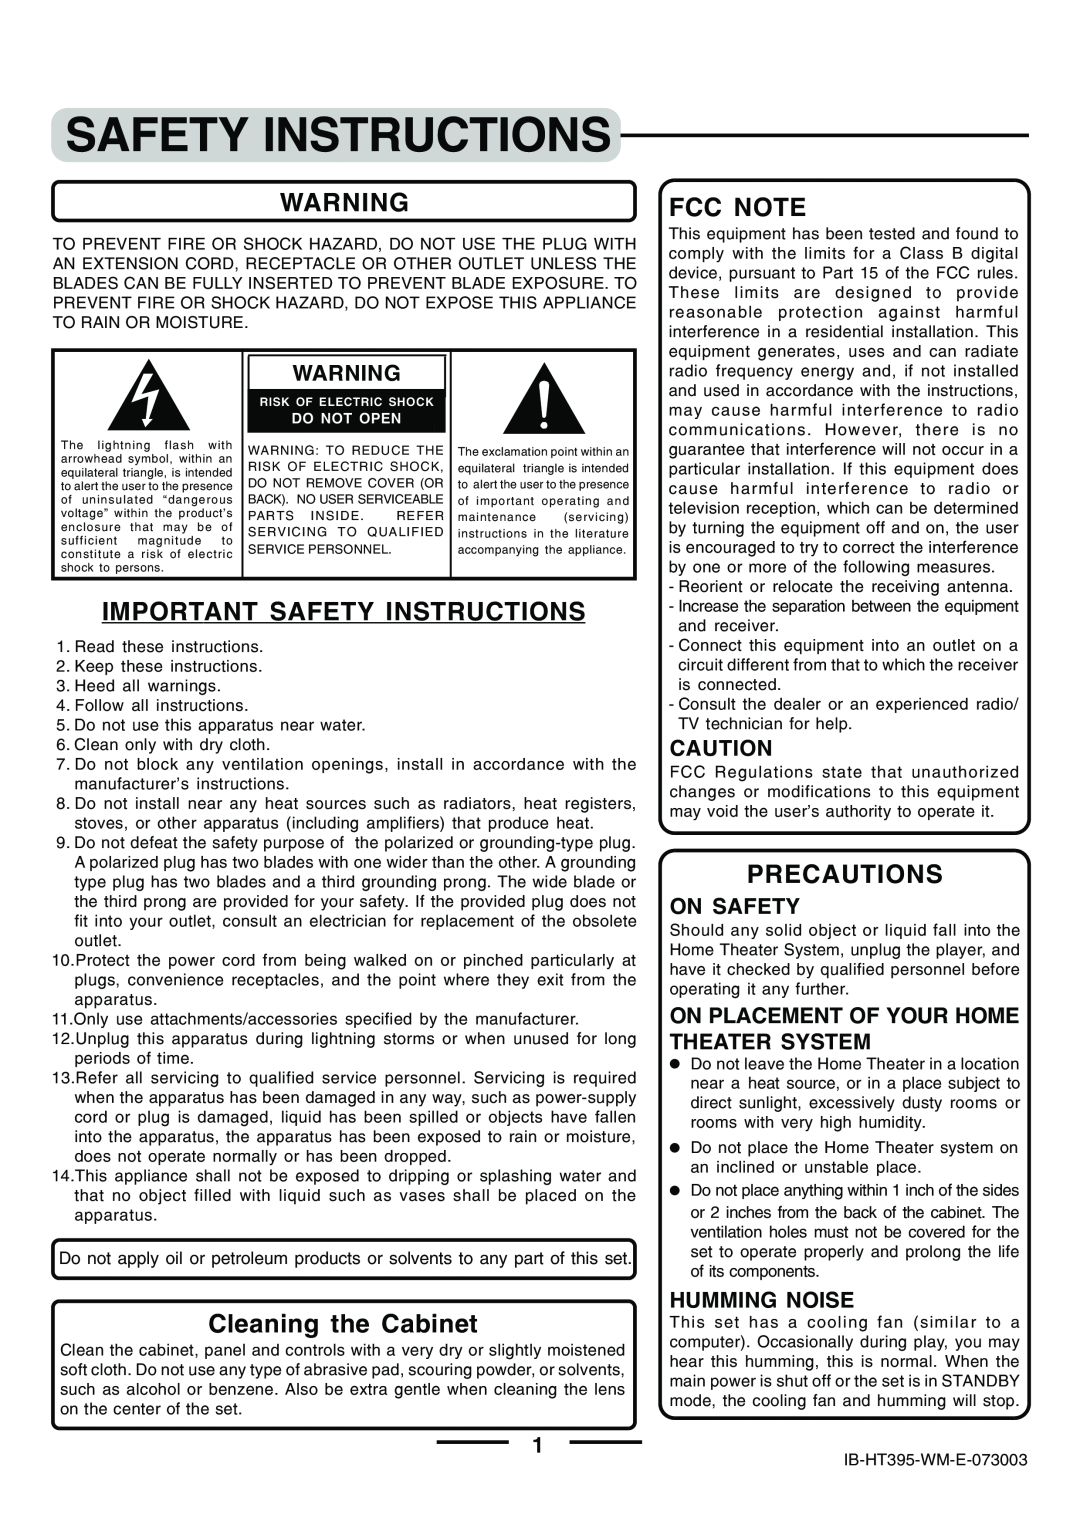 Lenoxx Electronics HT-395 manual Fcc Note, Important Safety Instructions, Cleaning the Cabinet, Precautions, On Safety 